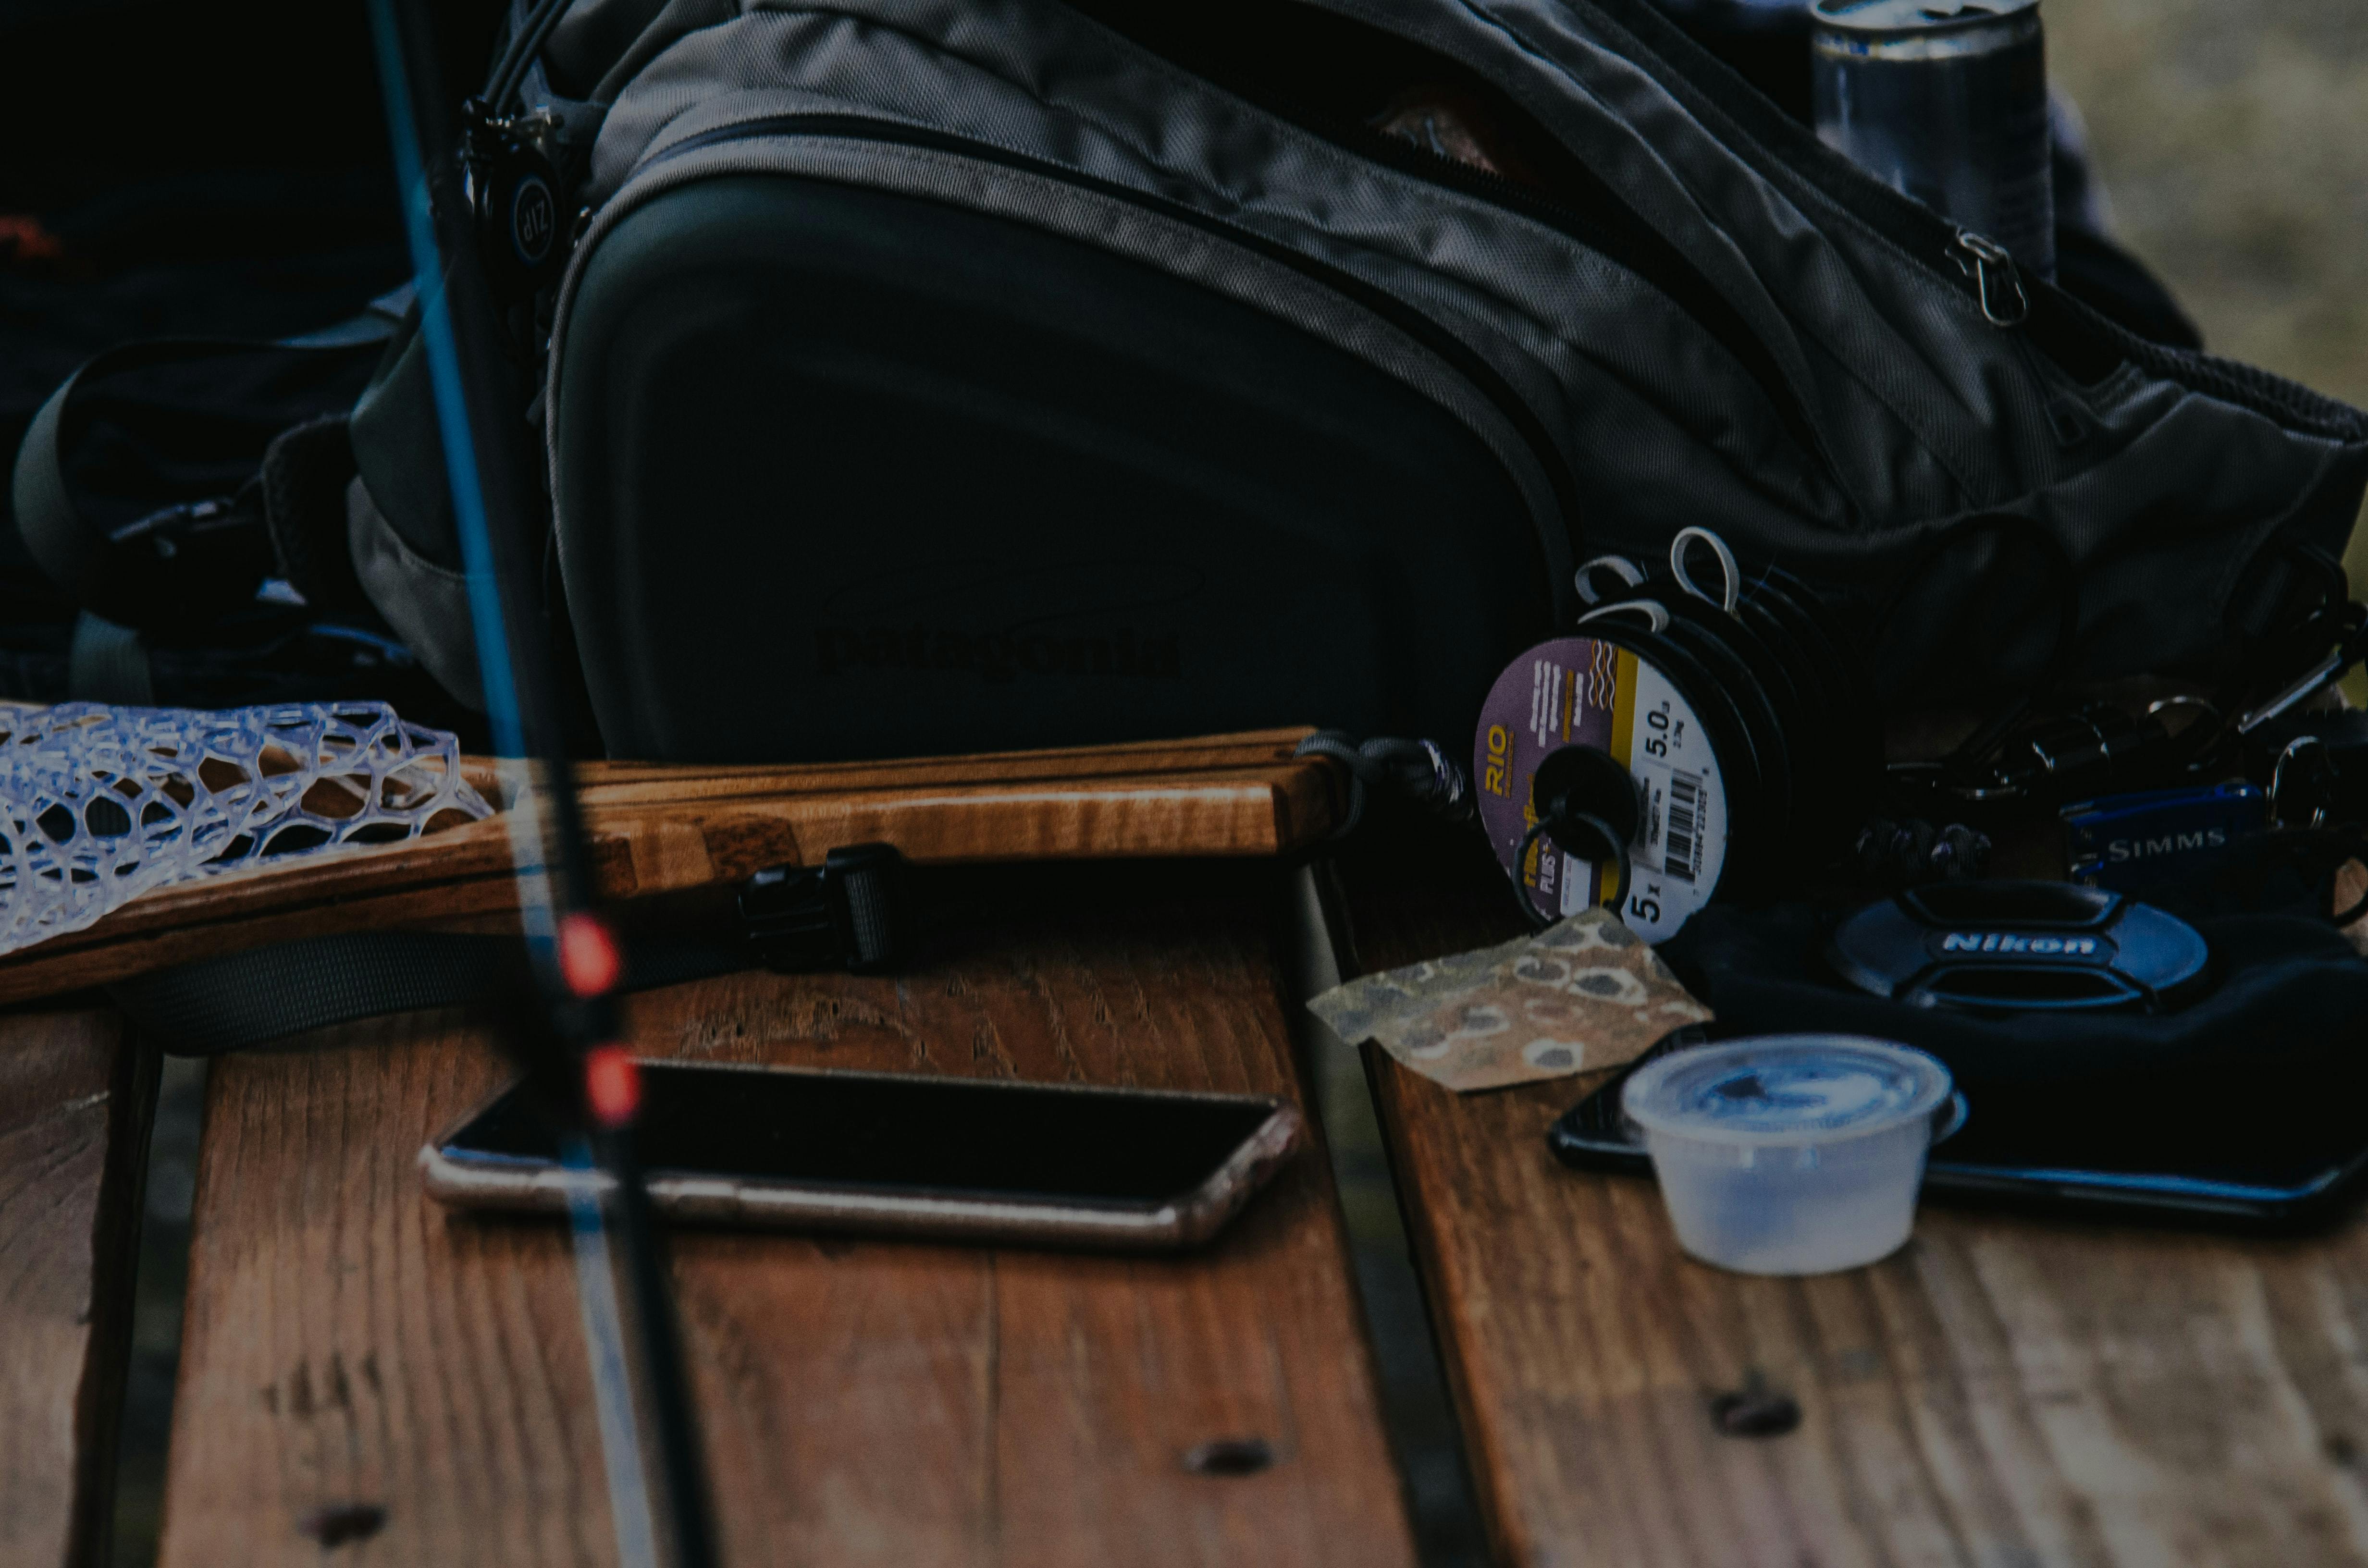 A phone, net, and other fly fishing gear sit on a wooden table. 